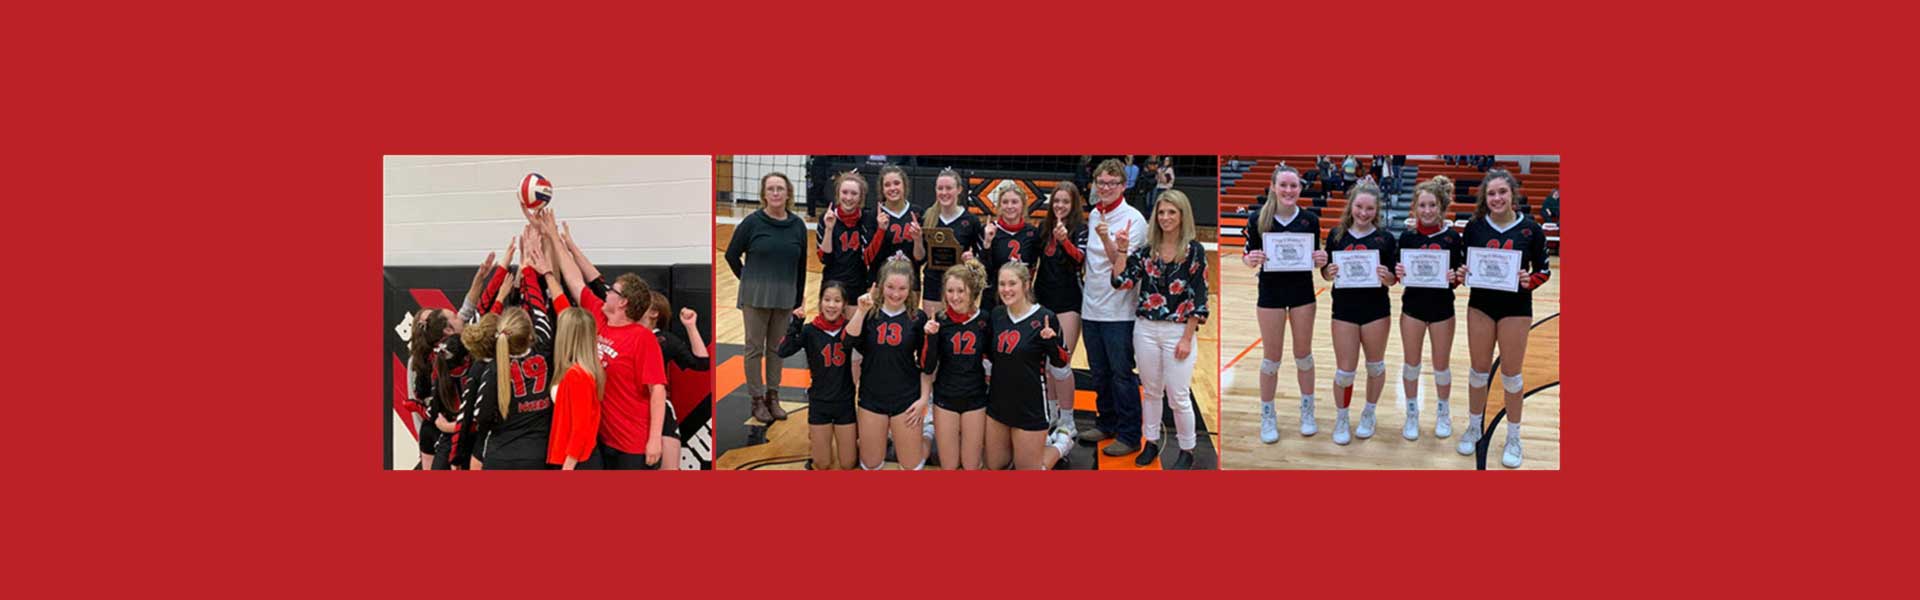 3 photos of the Lesterville volleyball team. Left all are gathered around a ball reaching for it, center team in lined up in two rows holding a plaque and one finger to represent number 1, right four players stand together on the court each holding a certificate